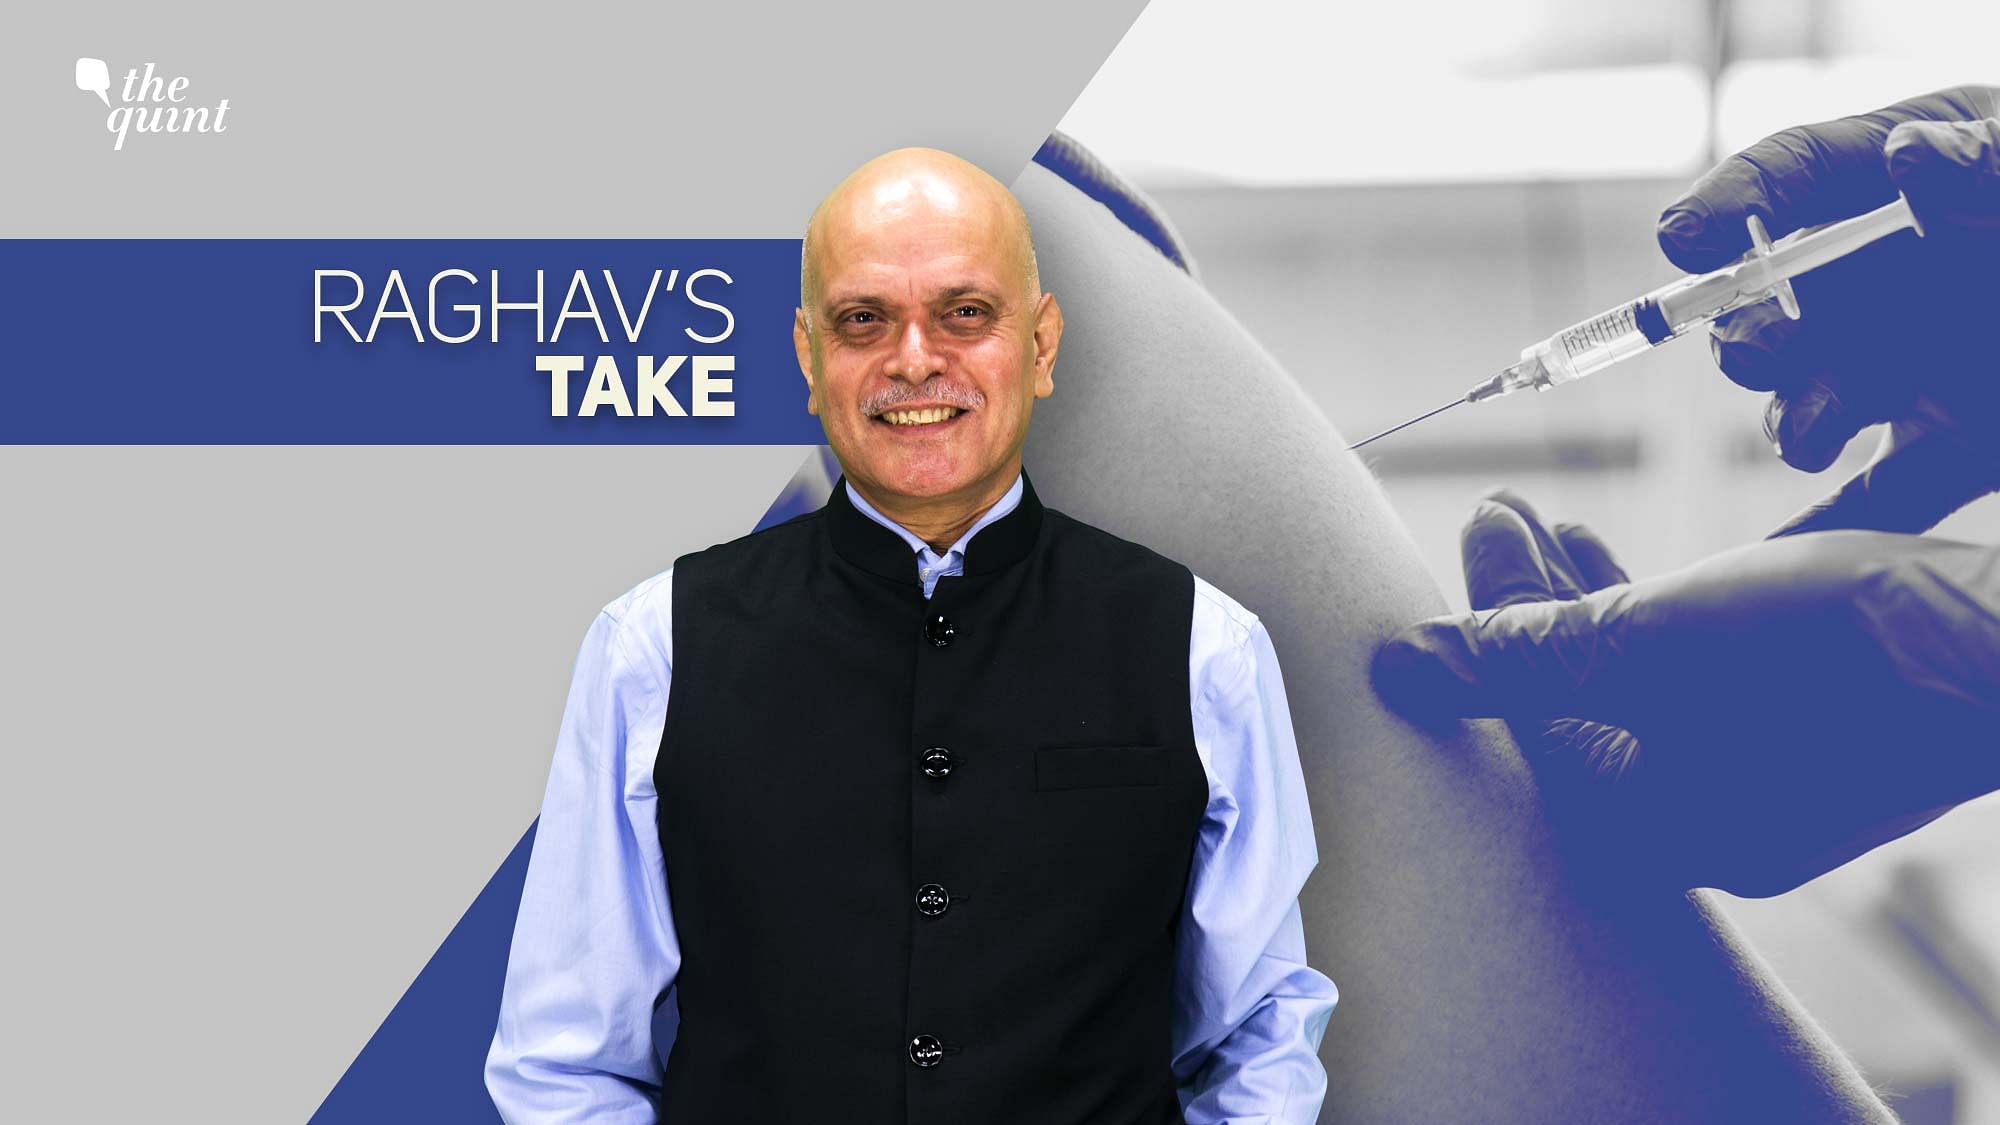 From India’s vaccine drive to Article 370, The Quint’s Editor-in-Chief Raghav Bahl shares his views on recent developments.